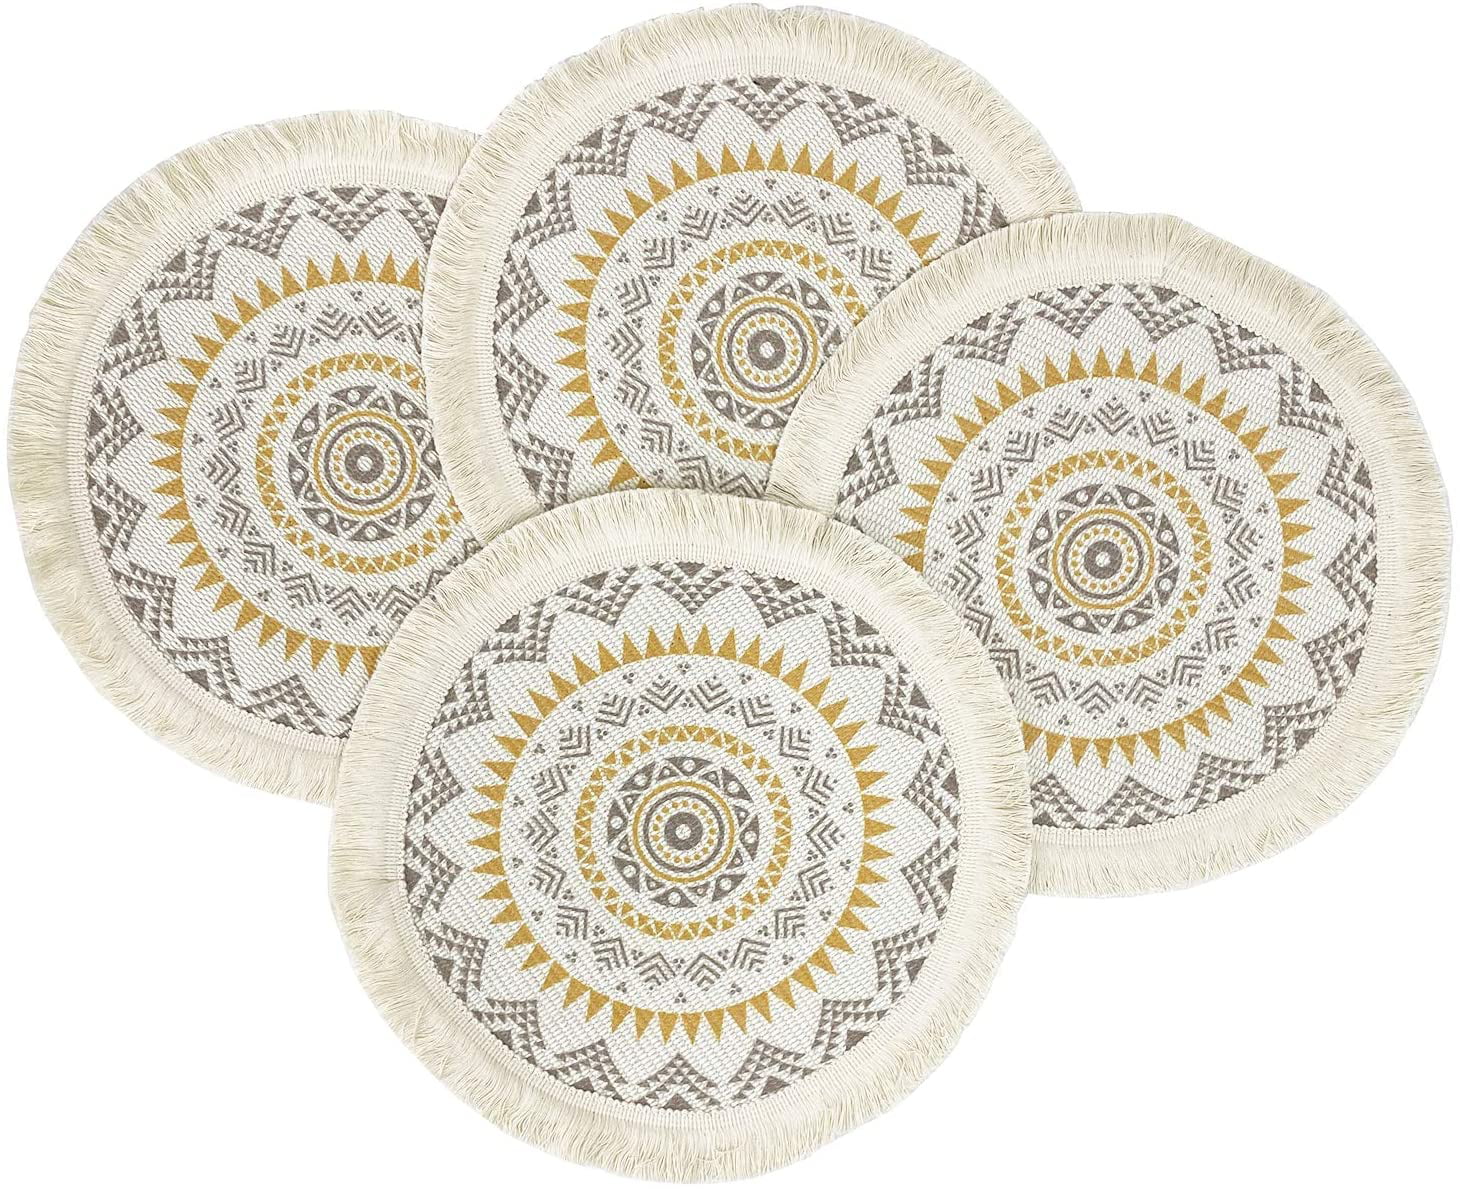 4x 5.5 Macrame Retro Coasters| Boho Decoration Heat Protection Mat Set of 2 Prick-N-Pounce Handmade Bohemian Home Decor Placemats Coffee Table Accessories Off-White 100% EcoCotton Cord